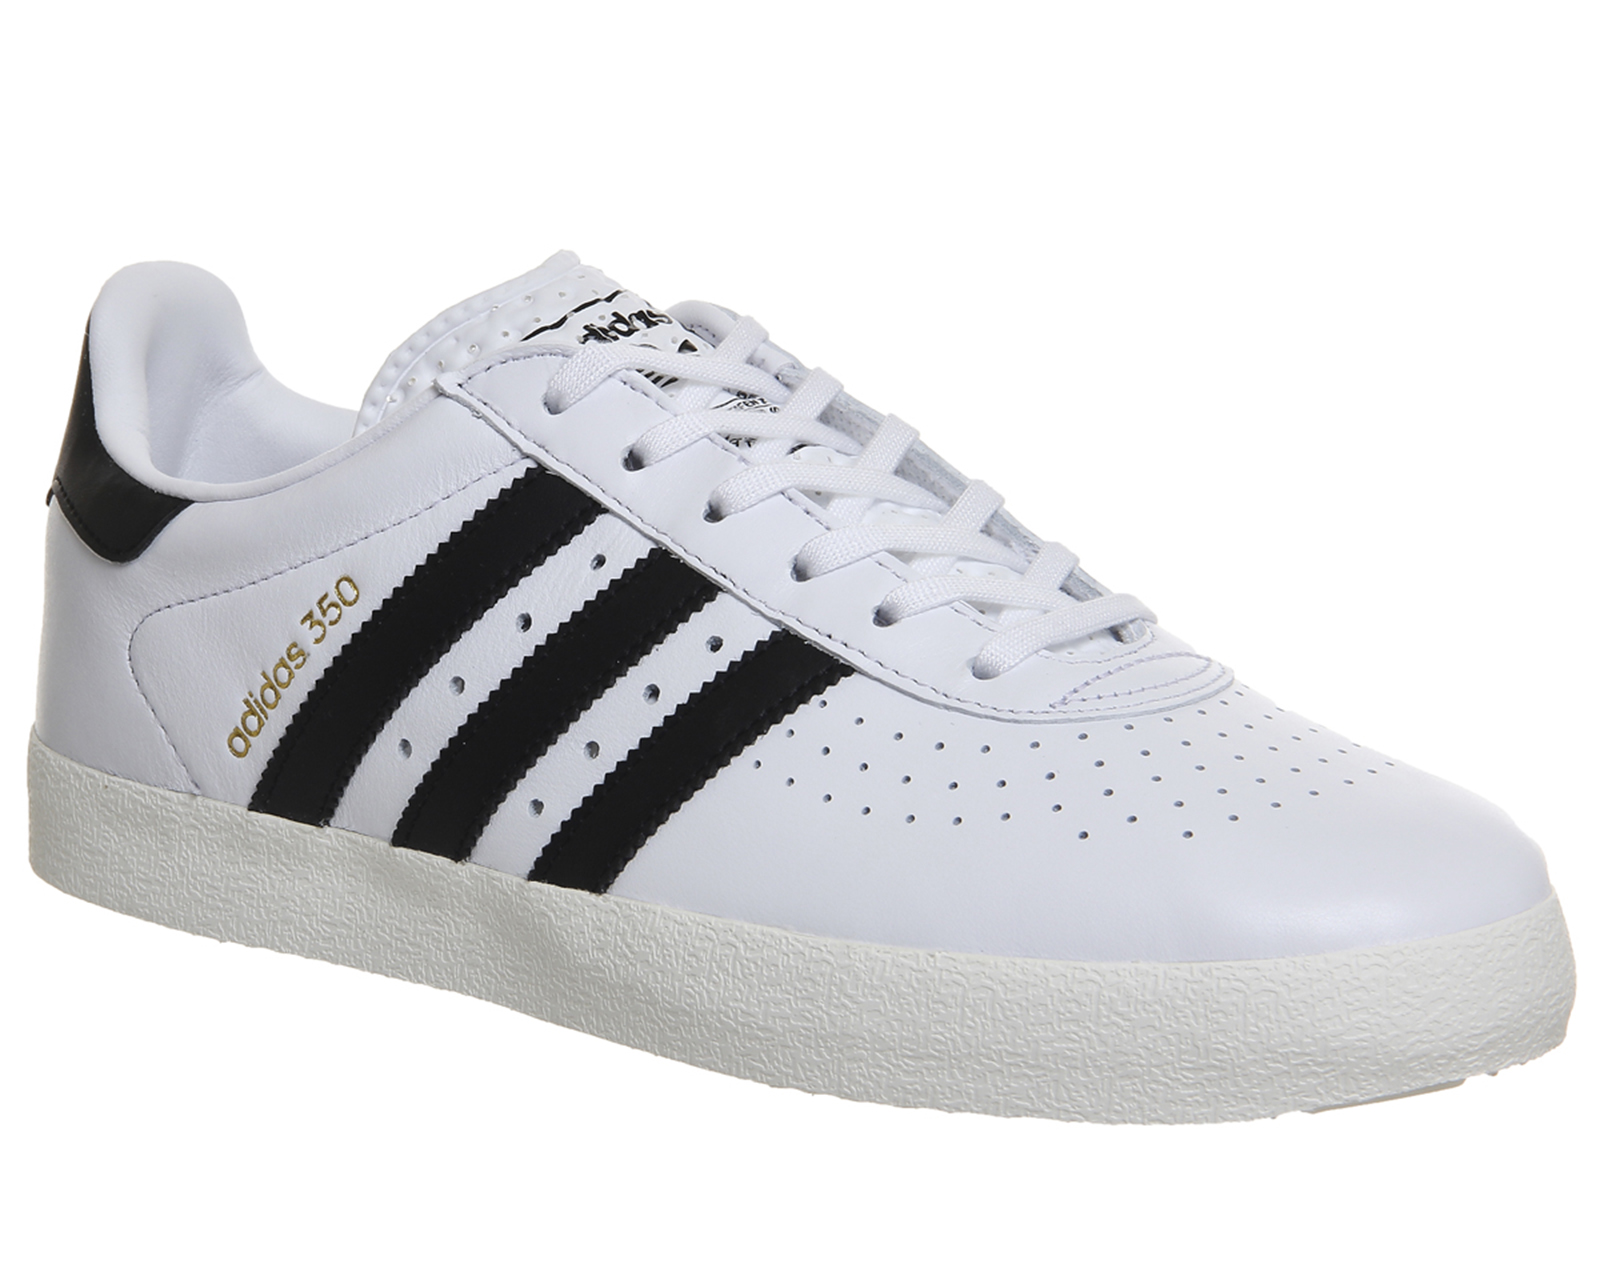 adidas Adidas 350 Trainers White Black Off White - His trainers